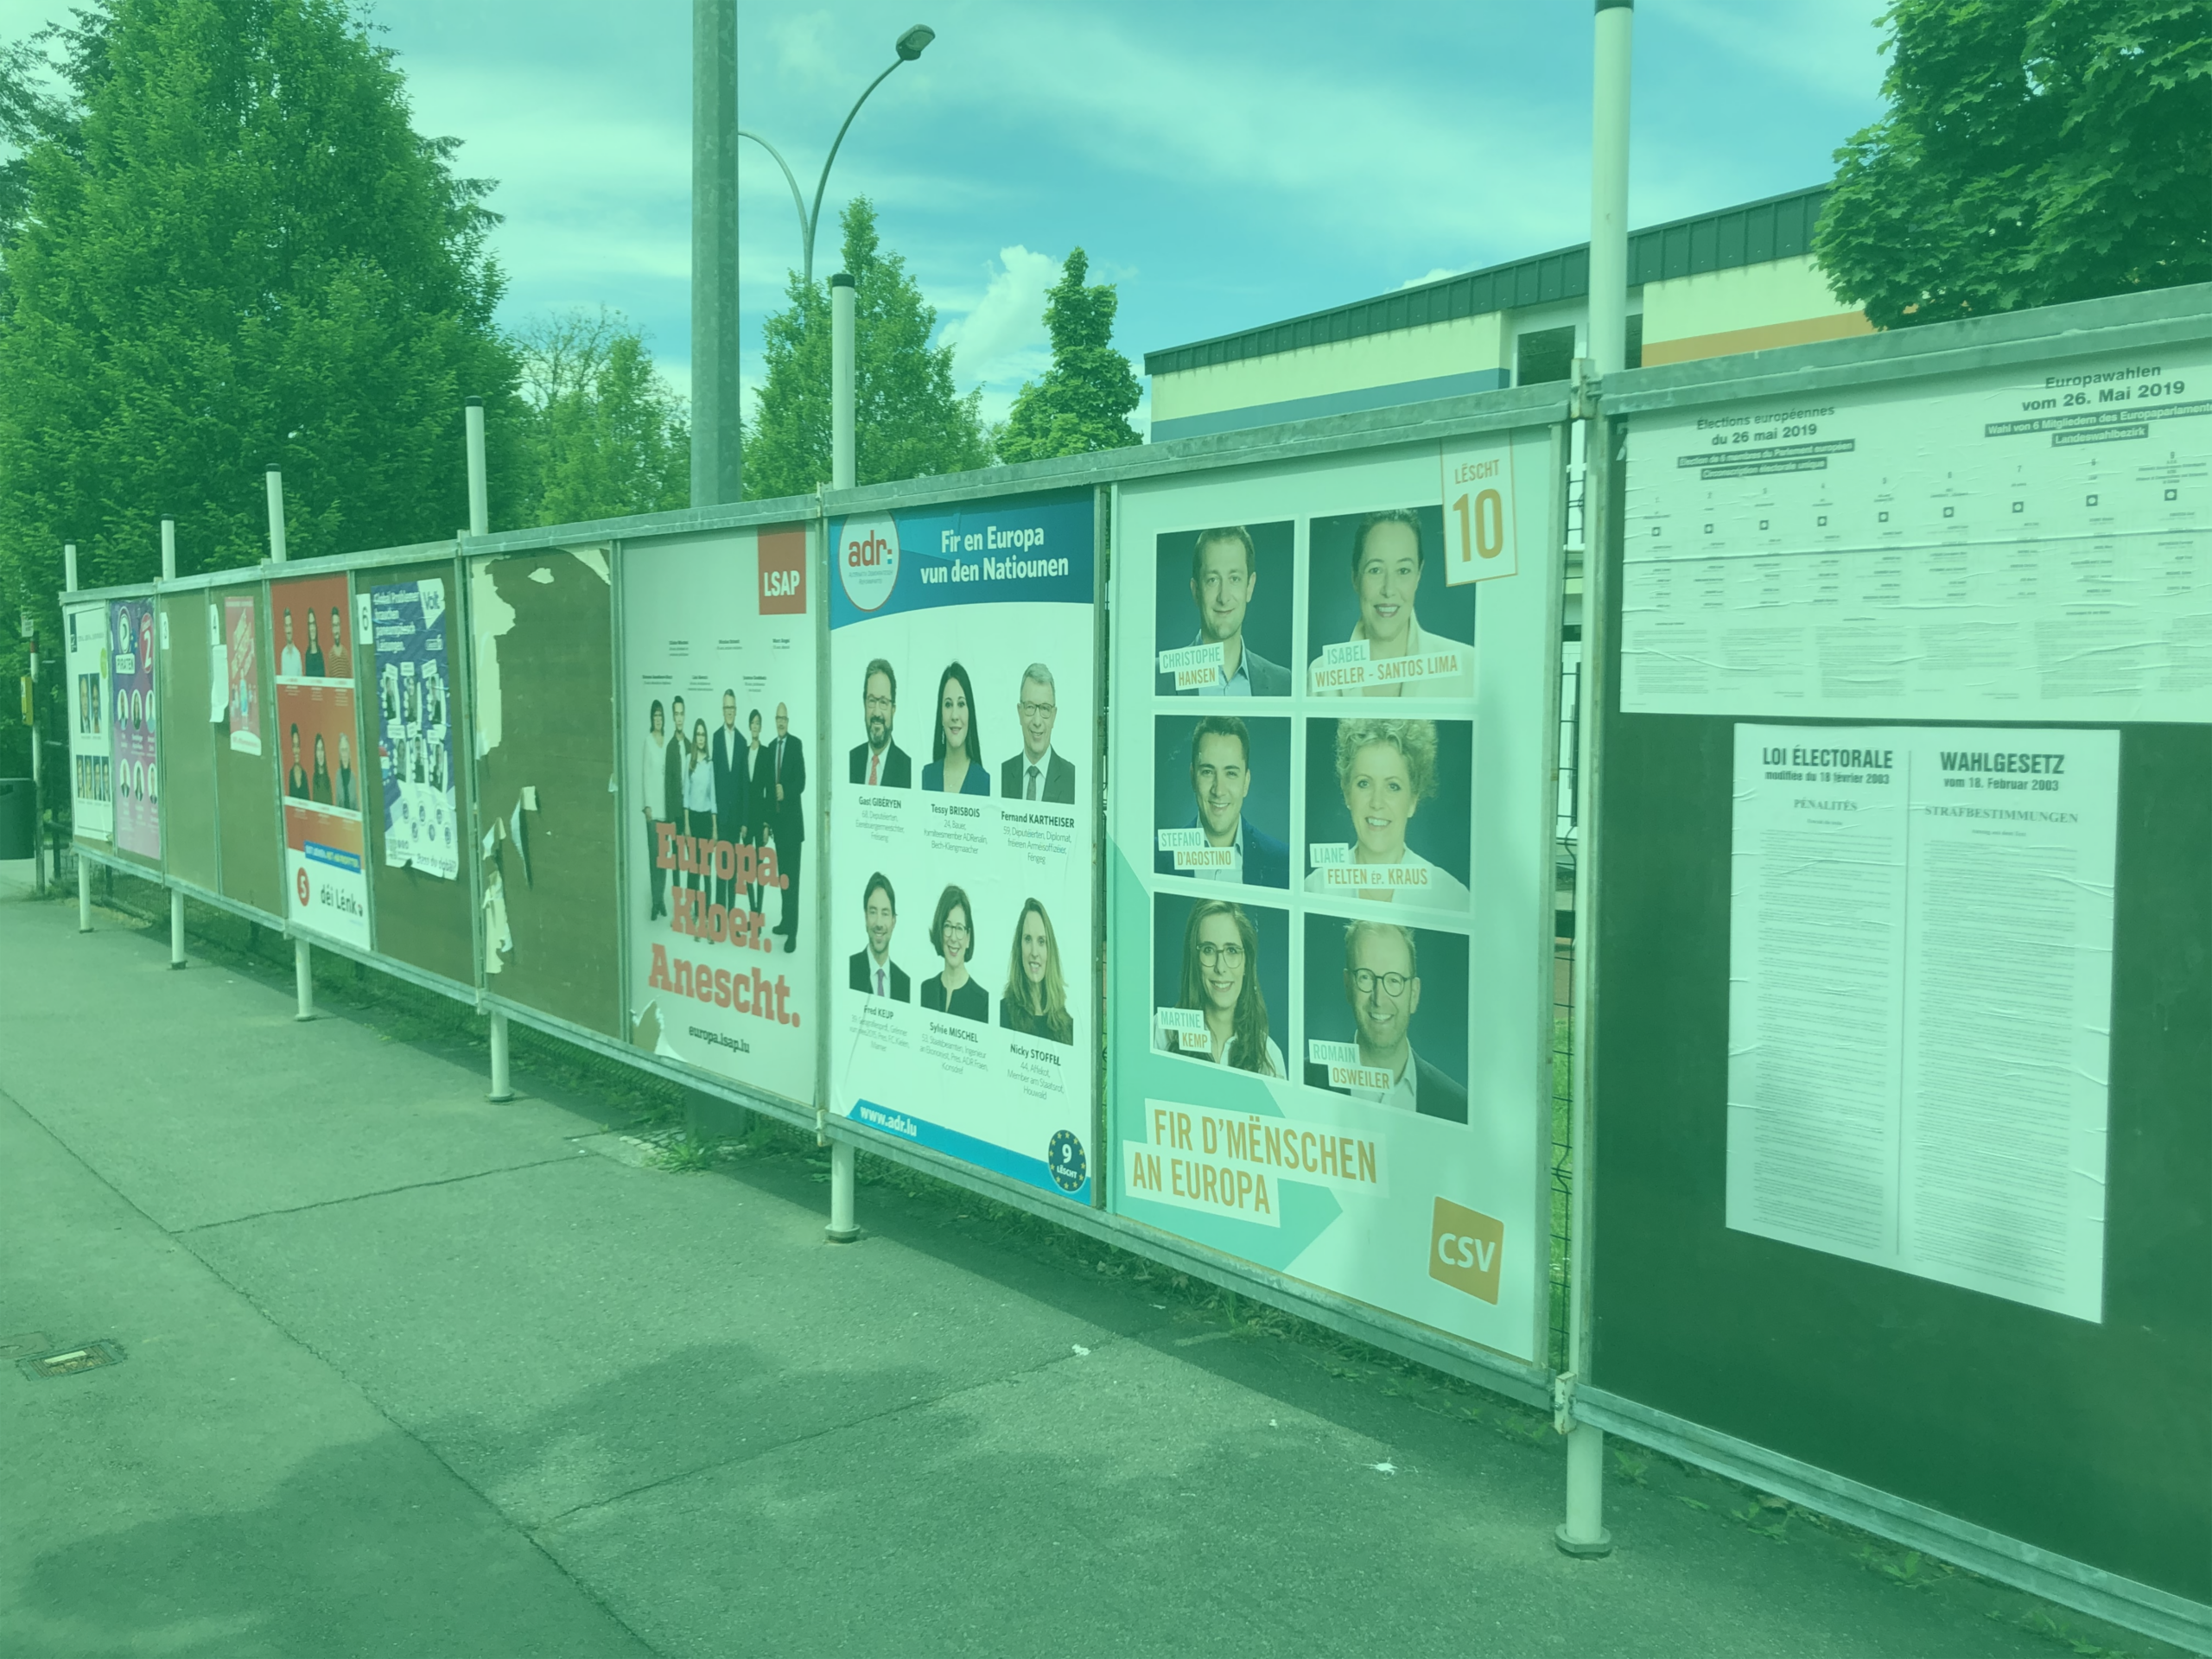 Photo: "Election posters for EU Parliament election in Luxembourg, various", by Bdx, licensed under CC BY-SA 4.0. Hue modified from the original